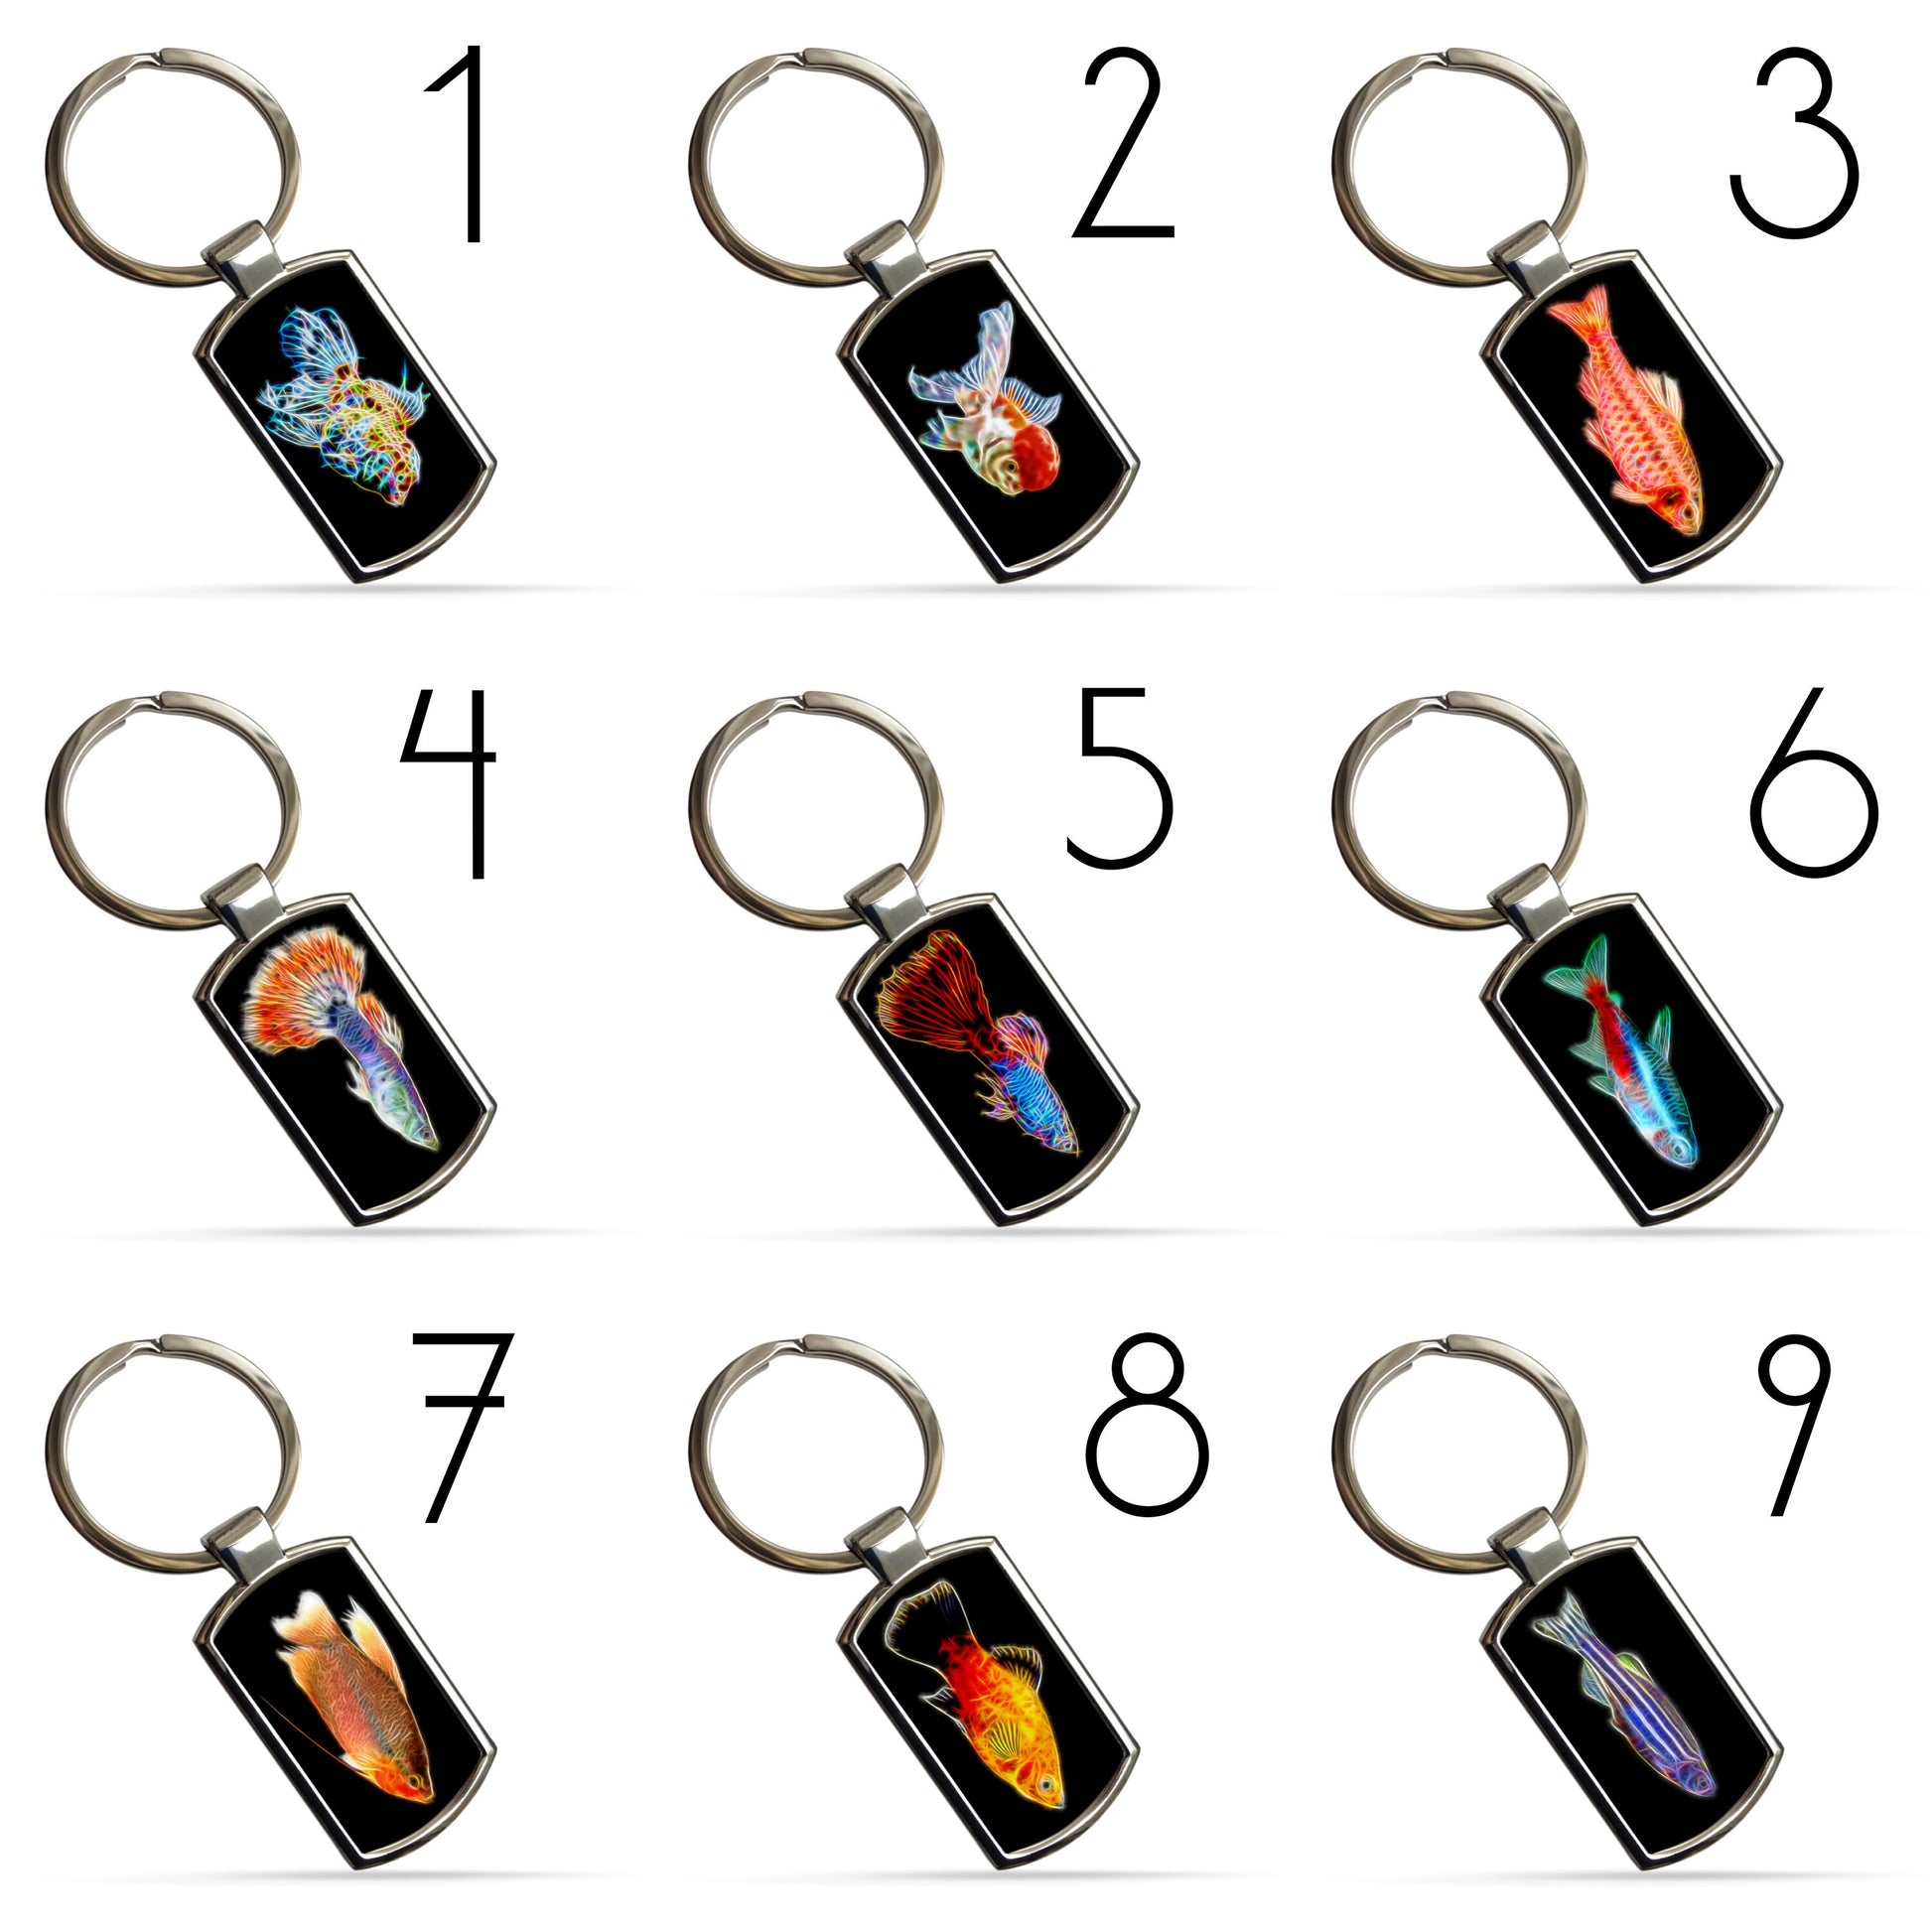 Fish Keychain / Keyring / Bagtag including Betta, Cichlid, Guppy, Discus, Angel.  A Perfect Gift for Aquatic Lover.